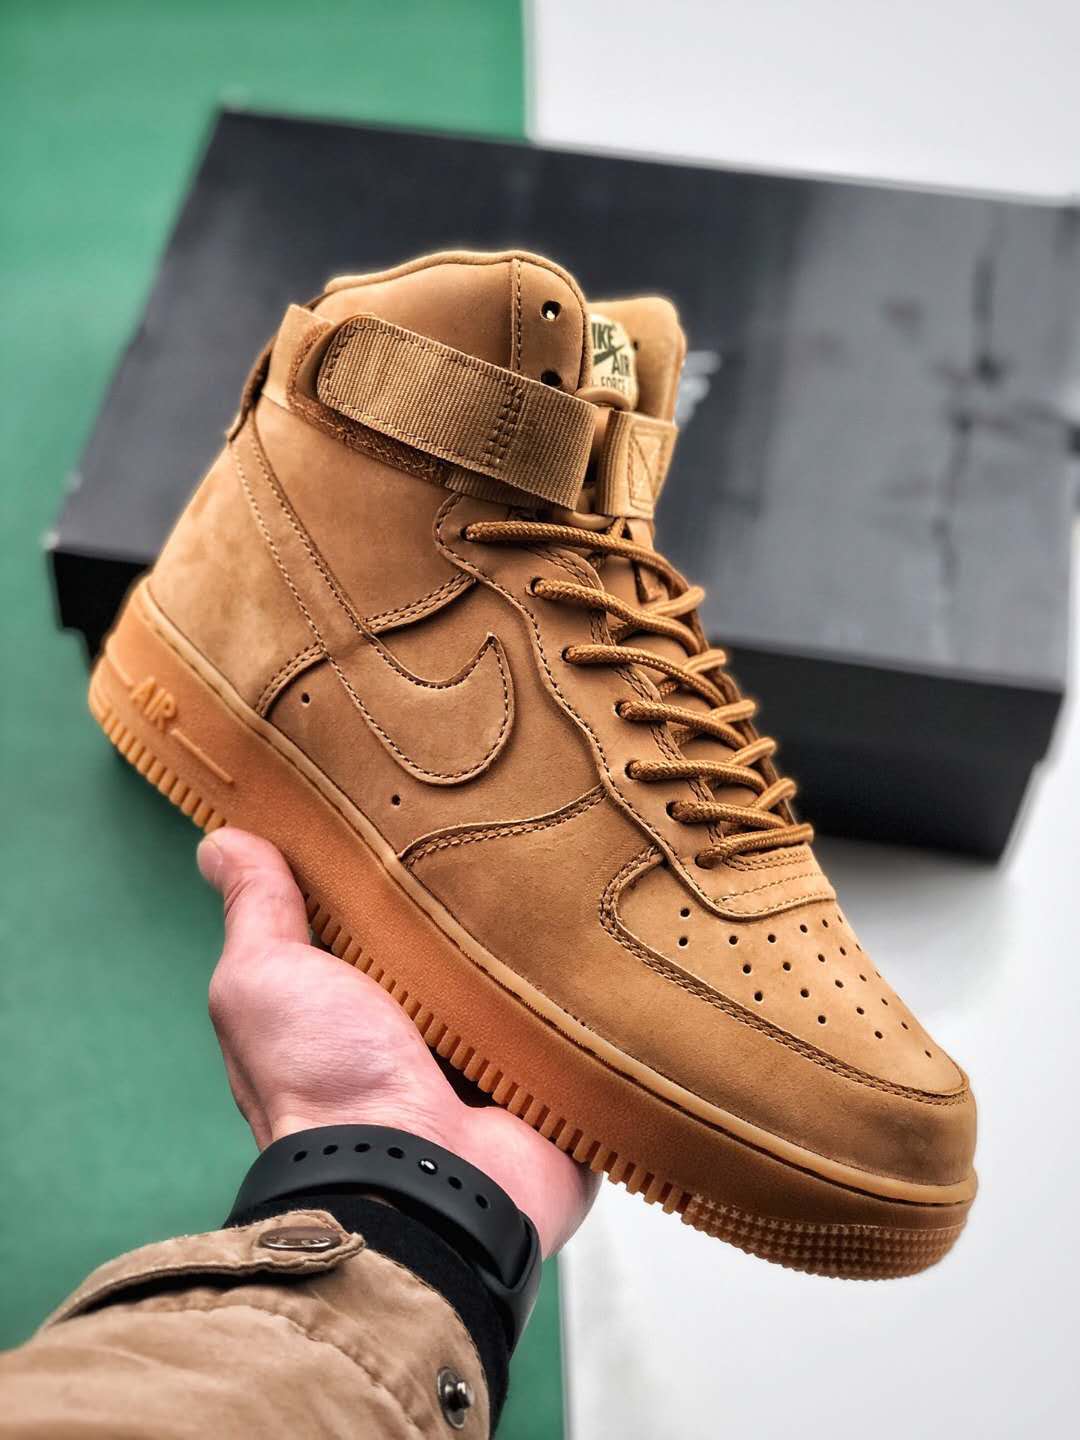 Nike Air Force 1 High Flax 882096-200 - Premium Sneaker for Ultimate Fashion Impact